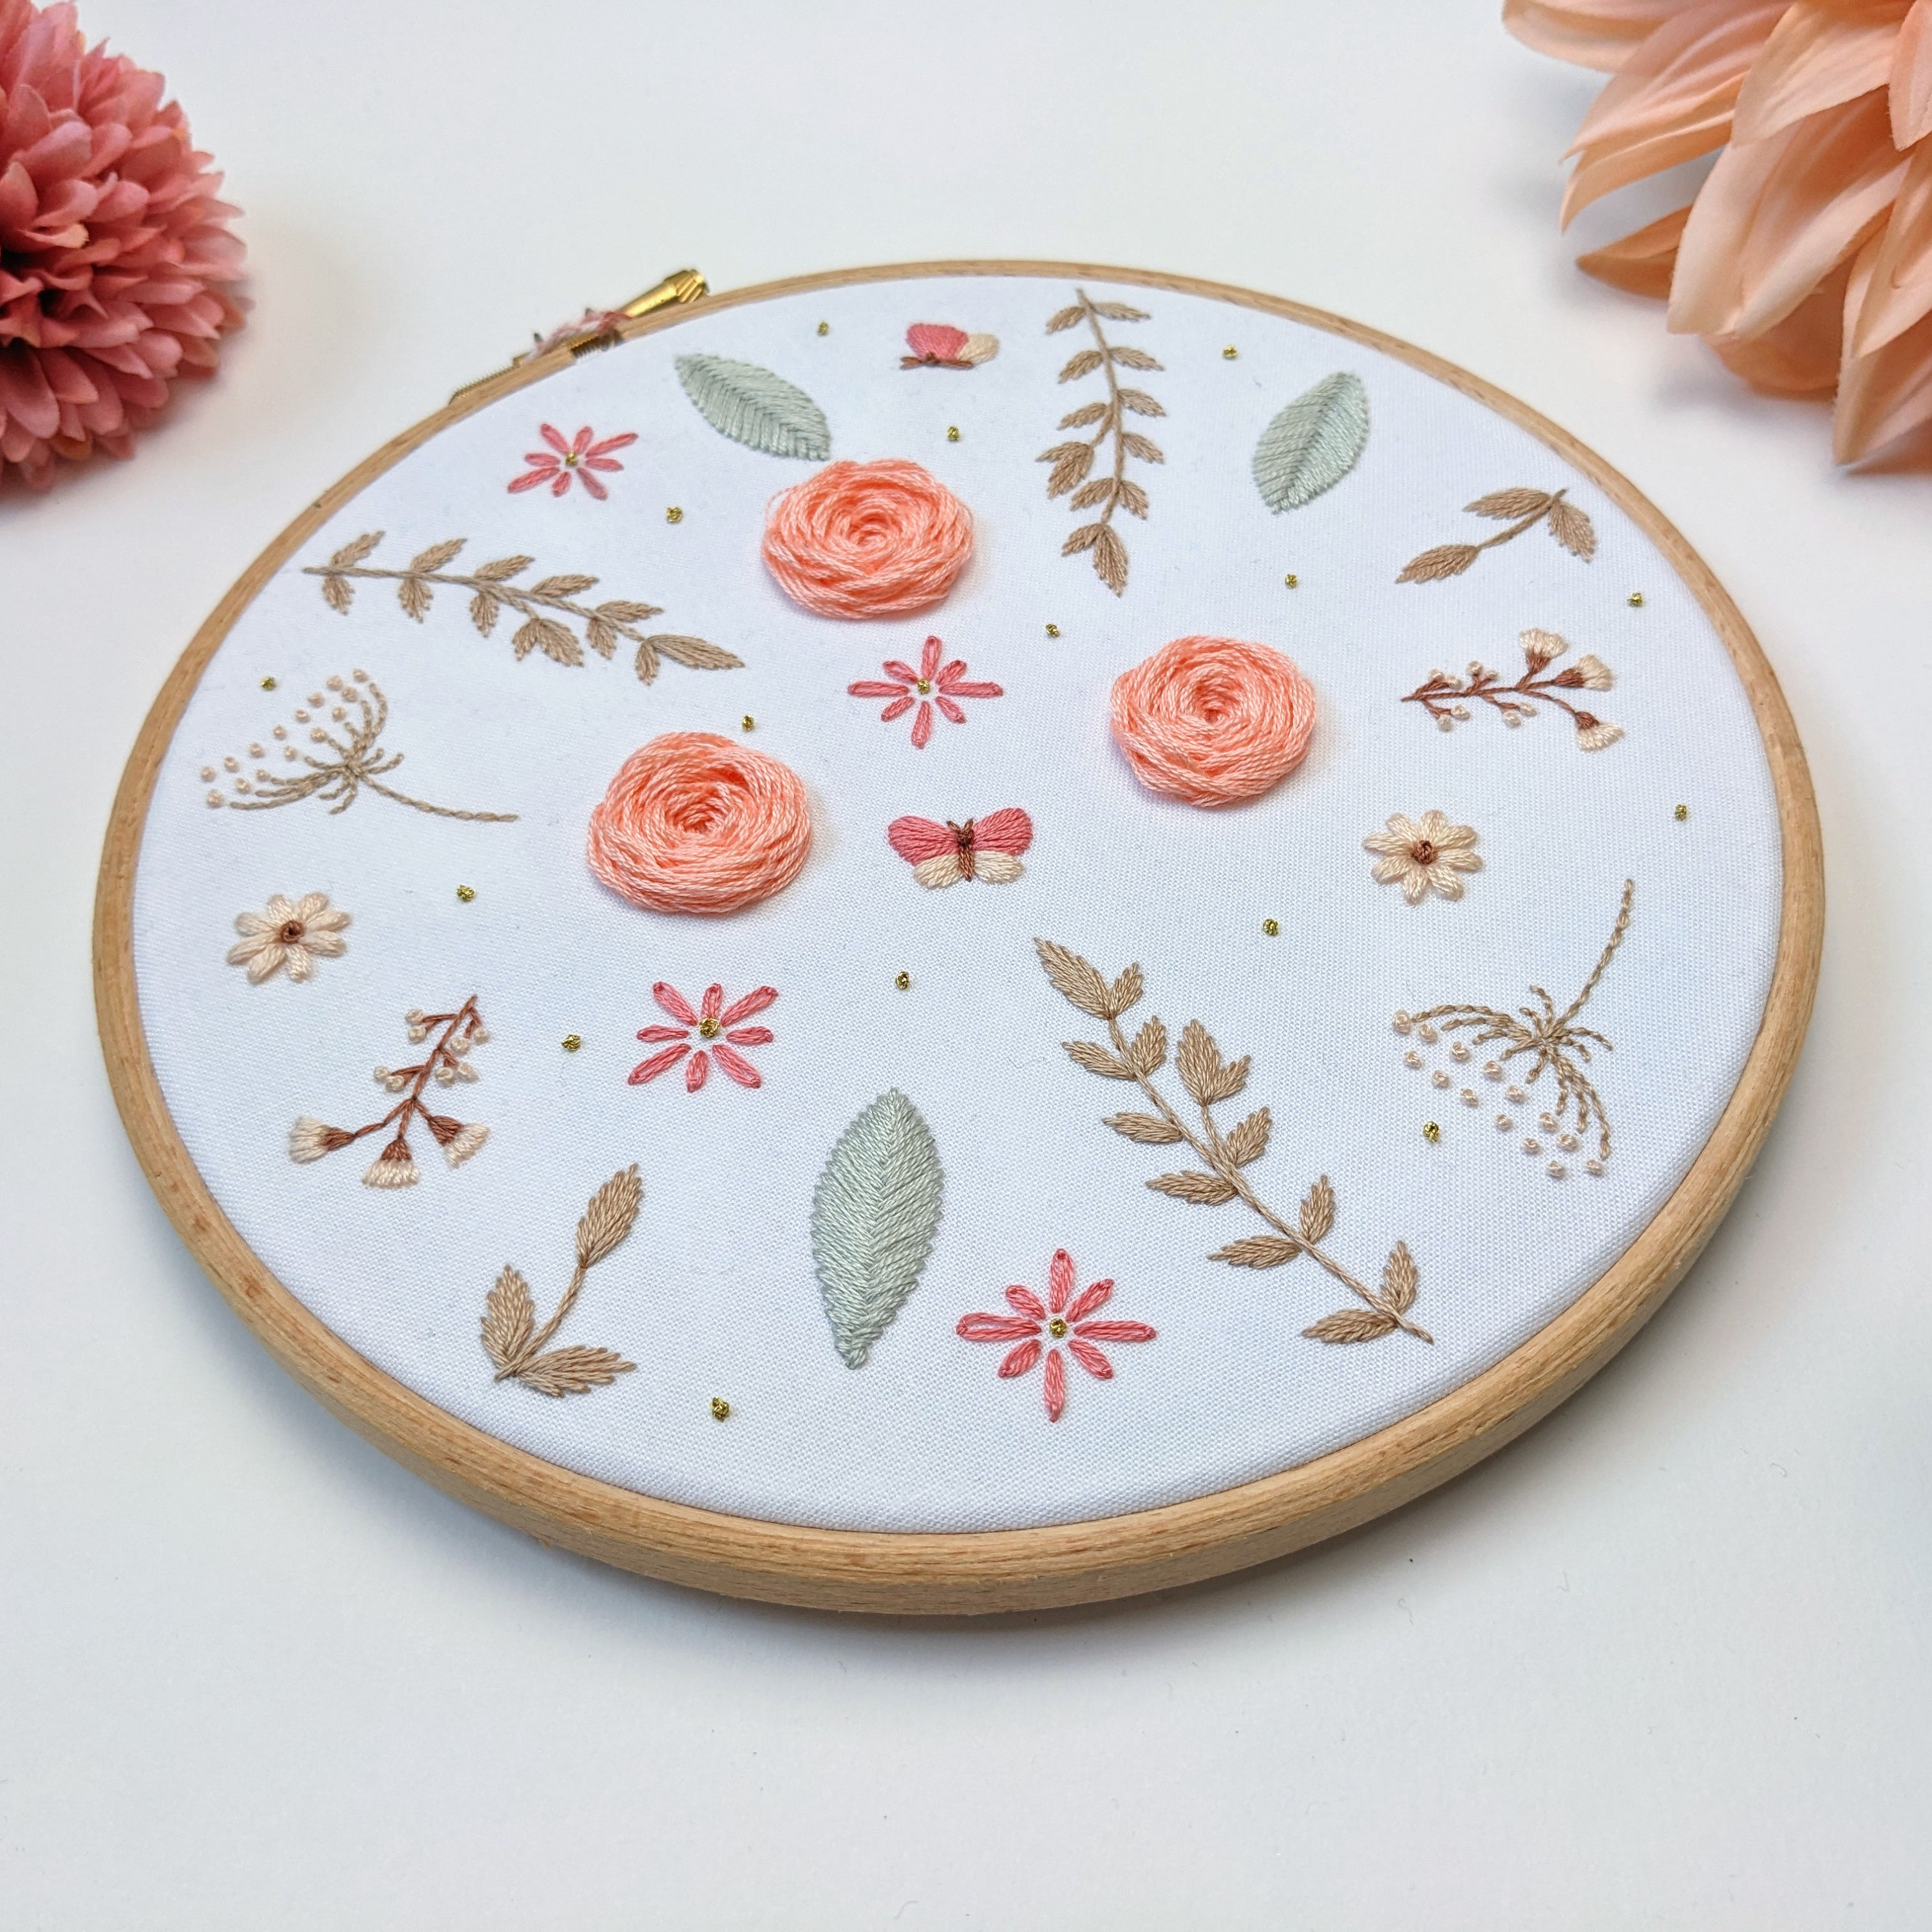 Crewel Embroidery Kit Grapevine and Pippins